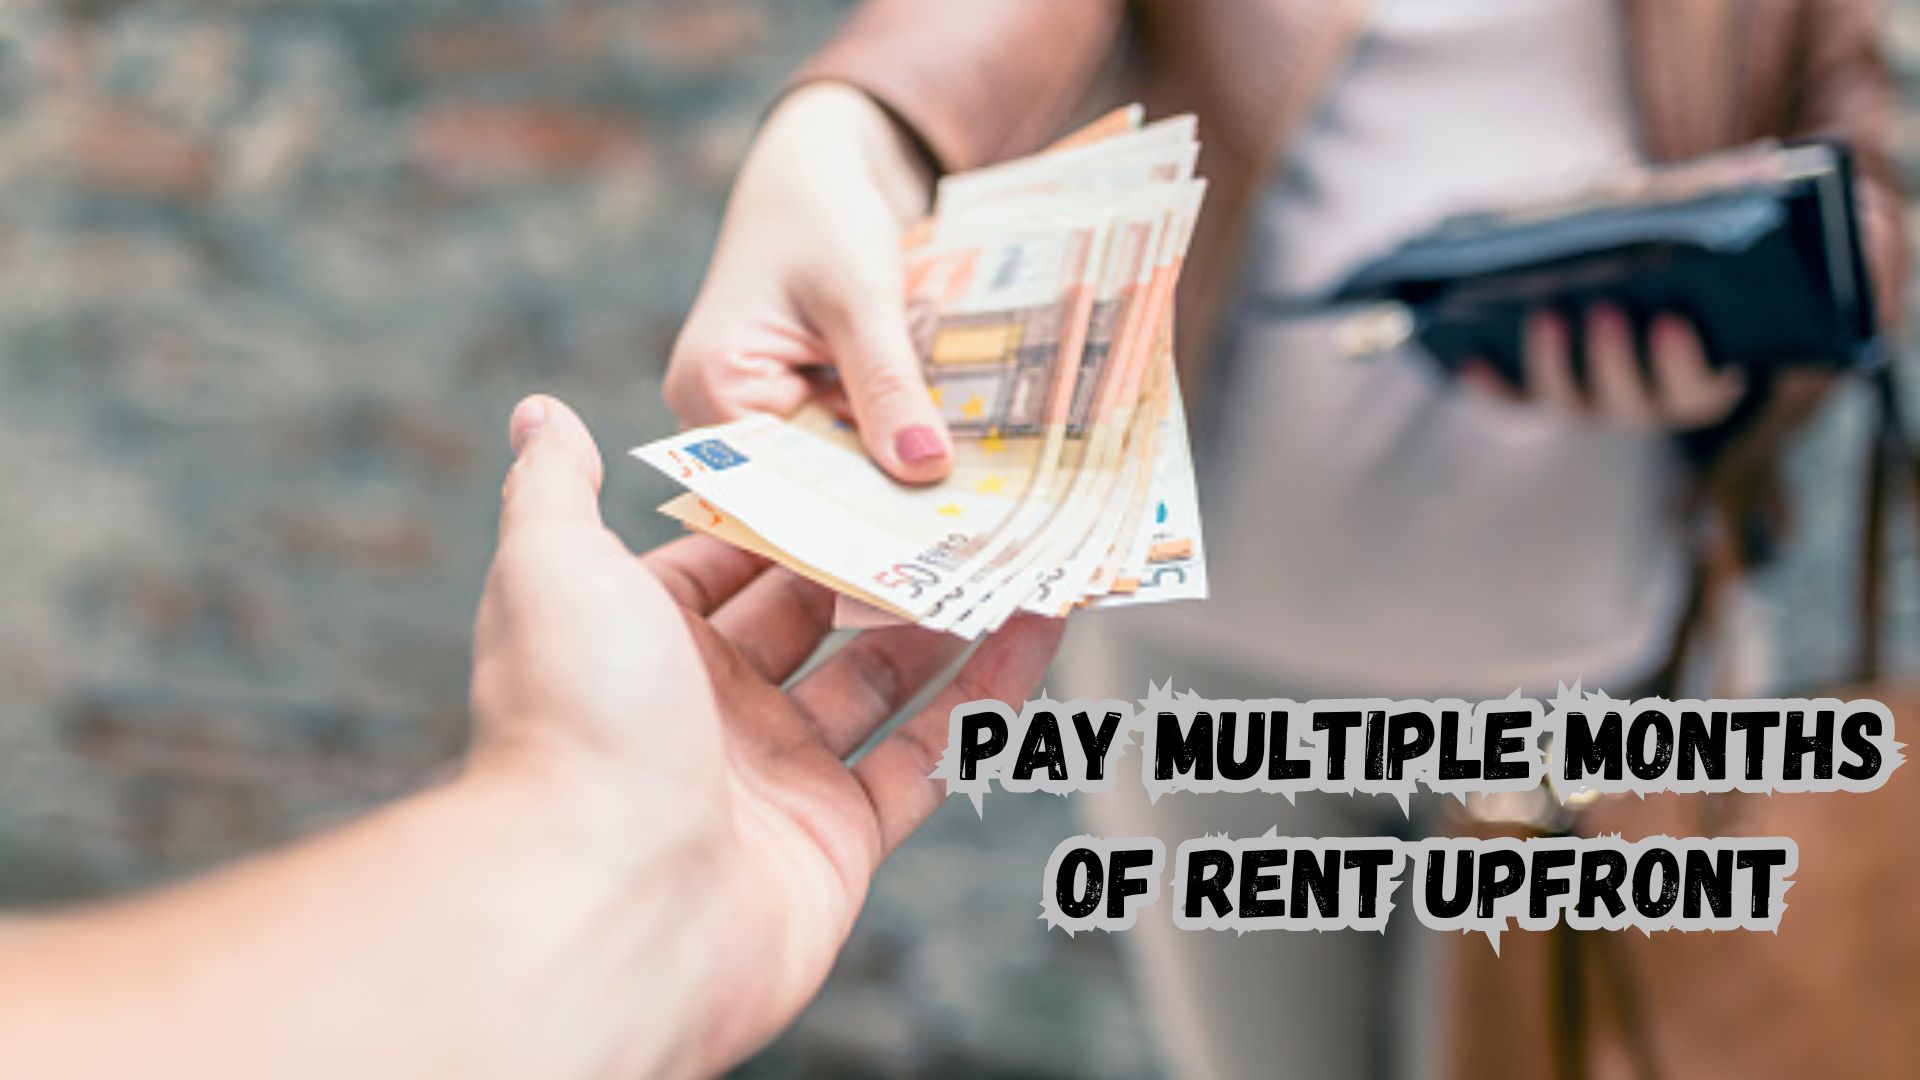 Pay Multiple Months of Rent Upfront.